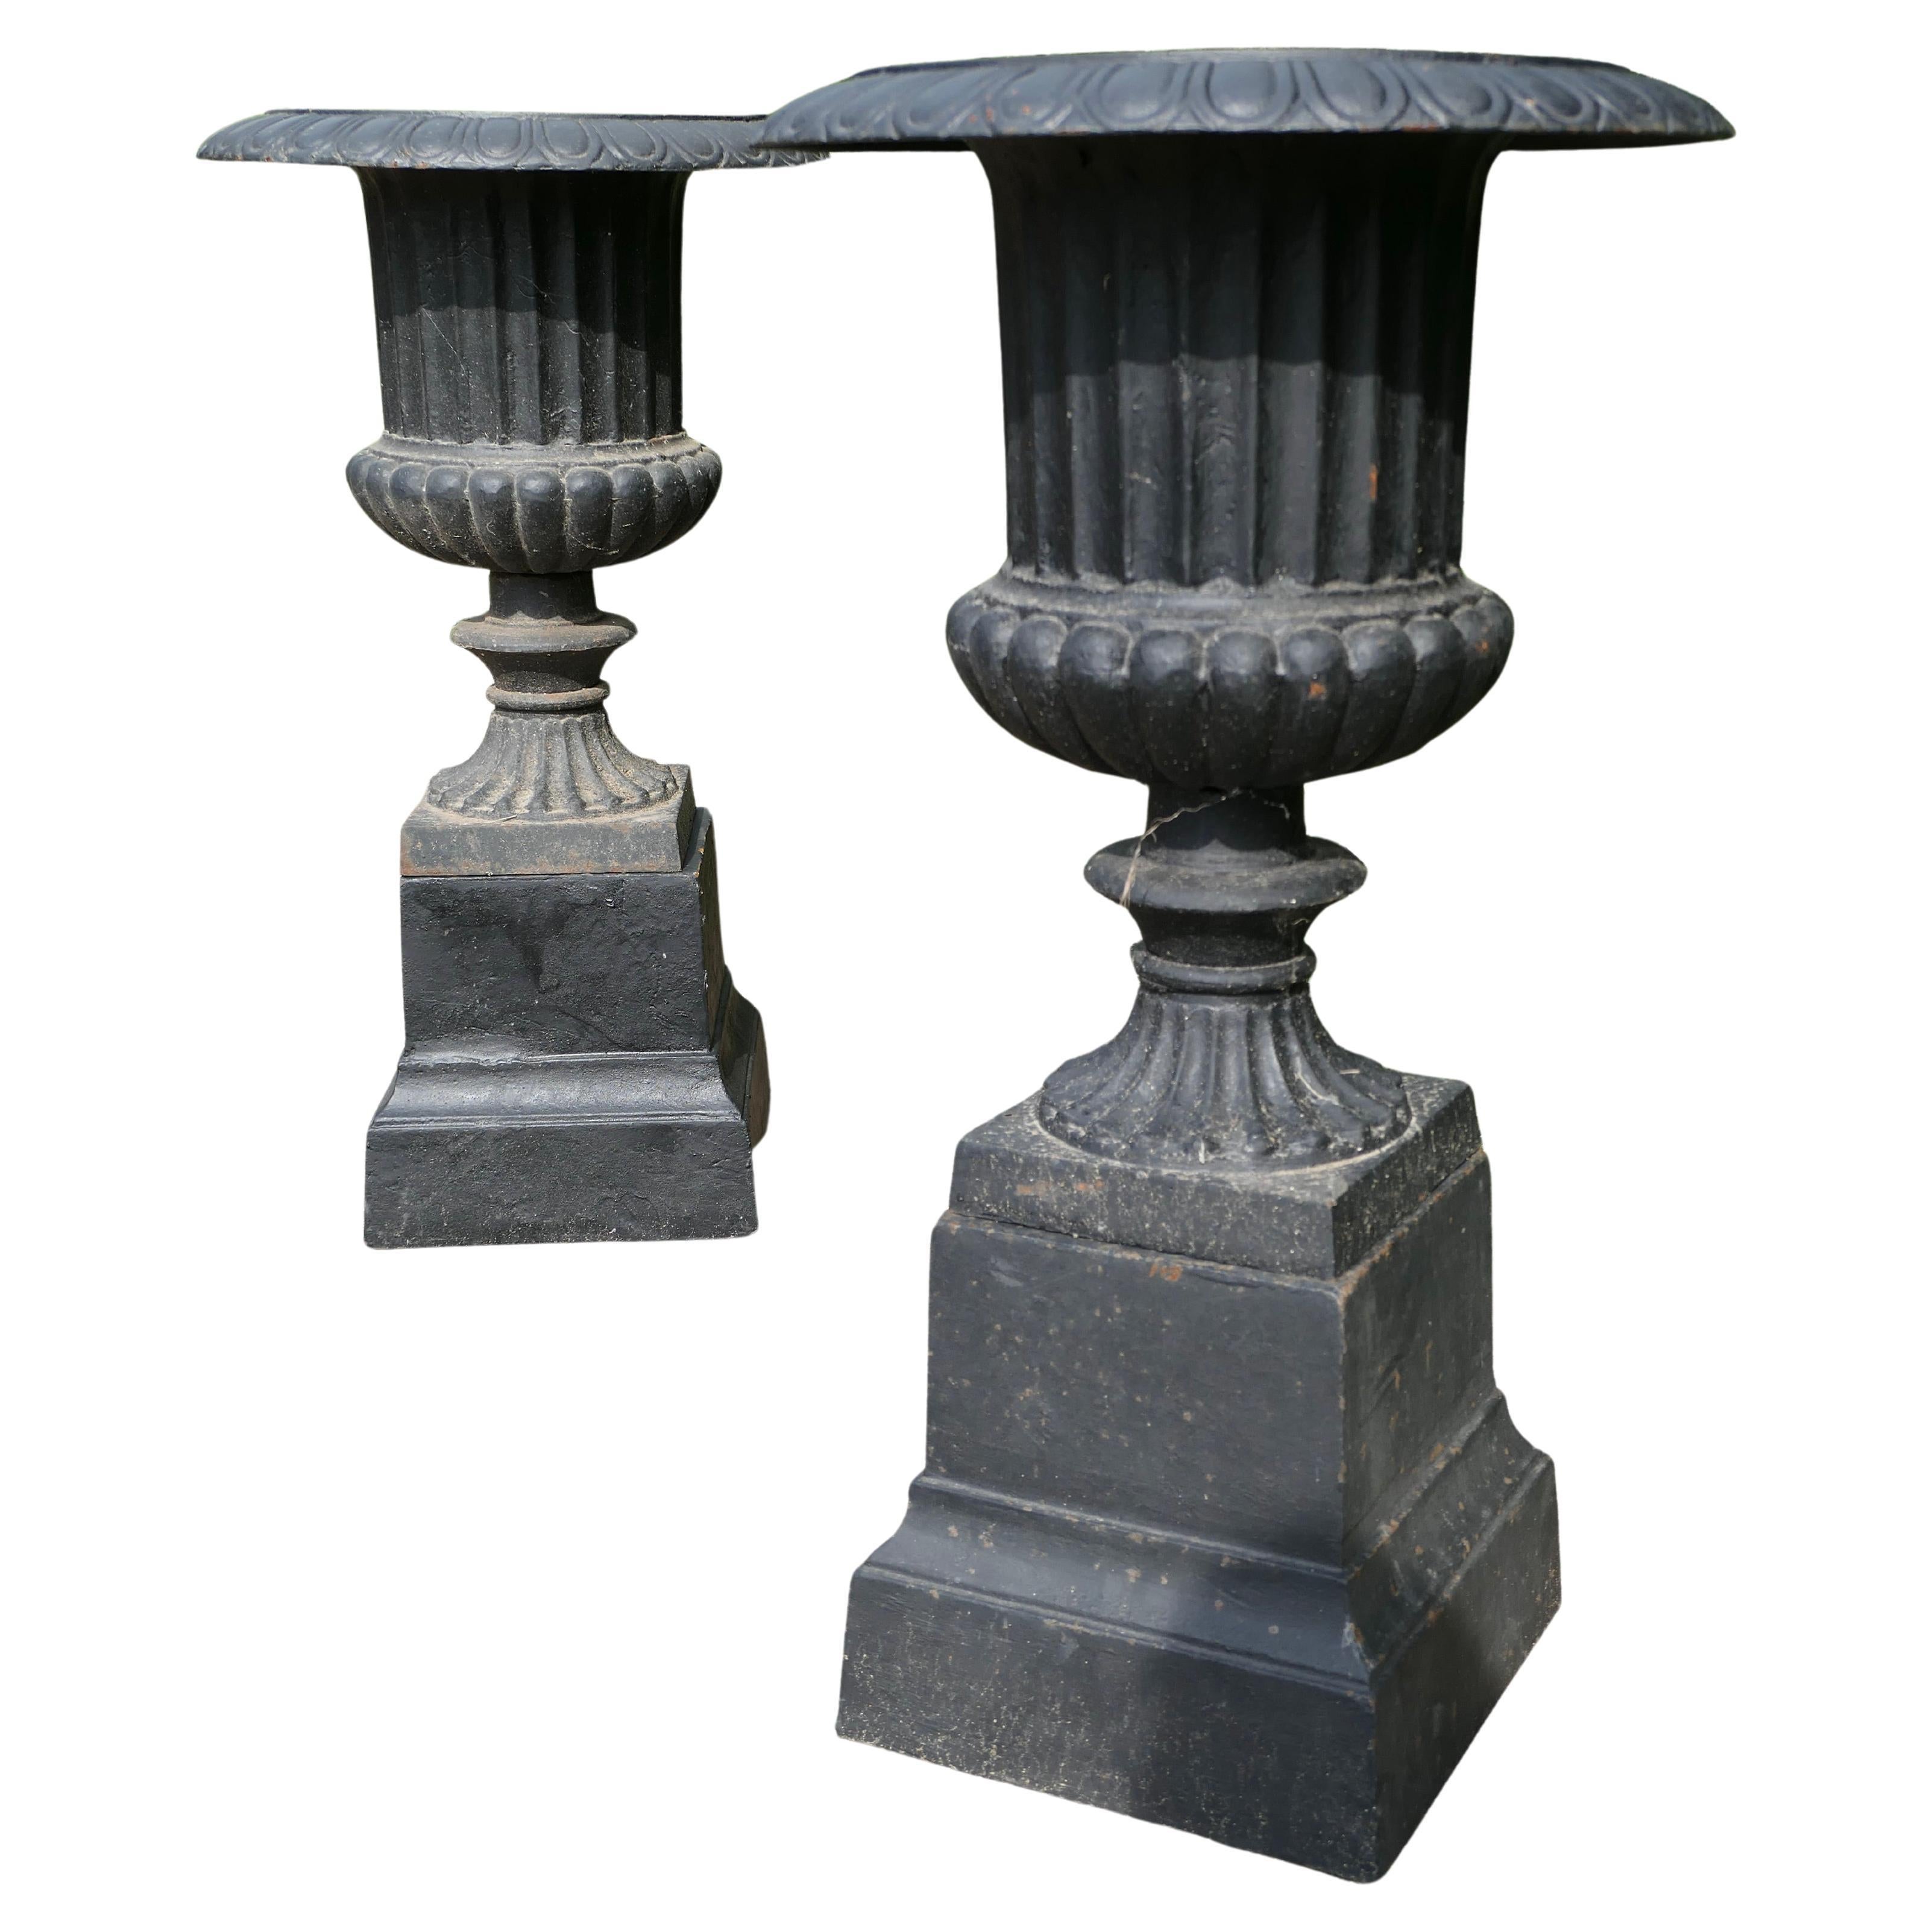 Pair of Tall Weathered Cast Iron Urns, Garden Planters